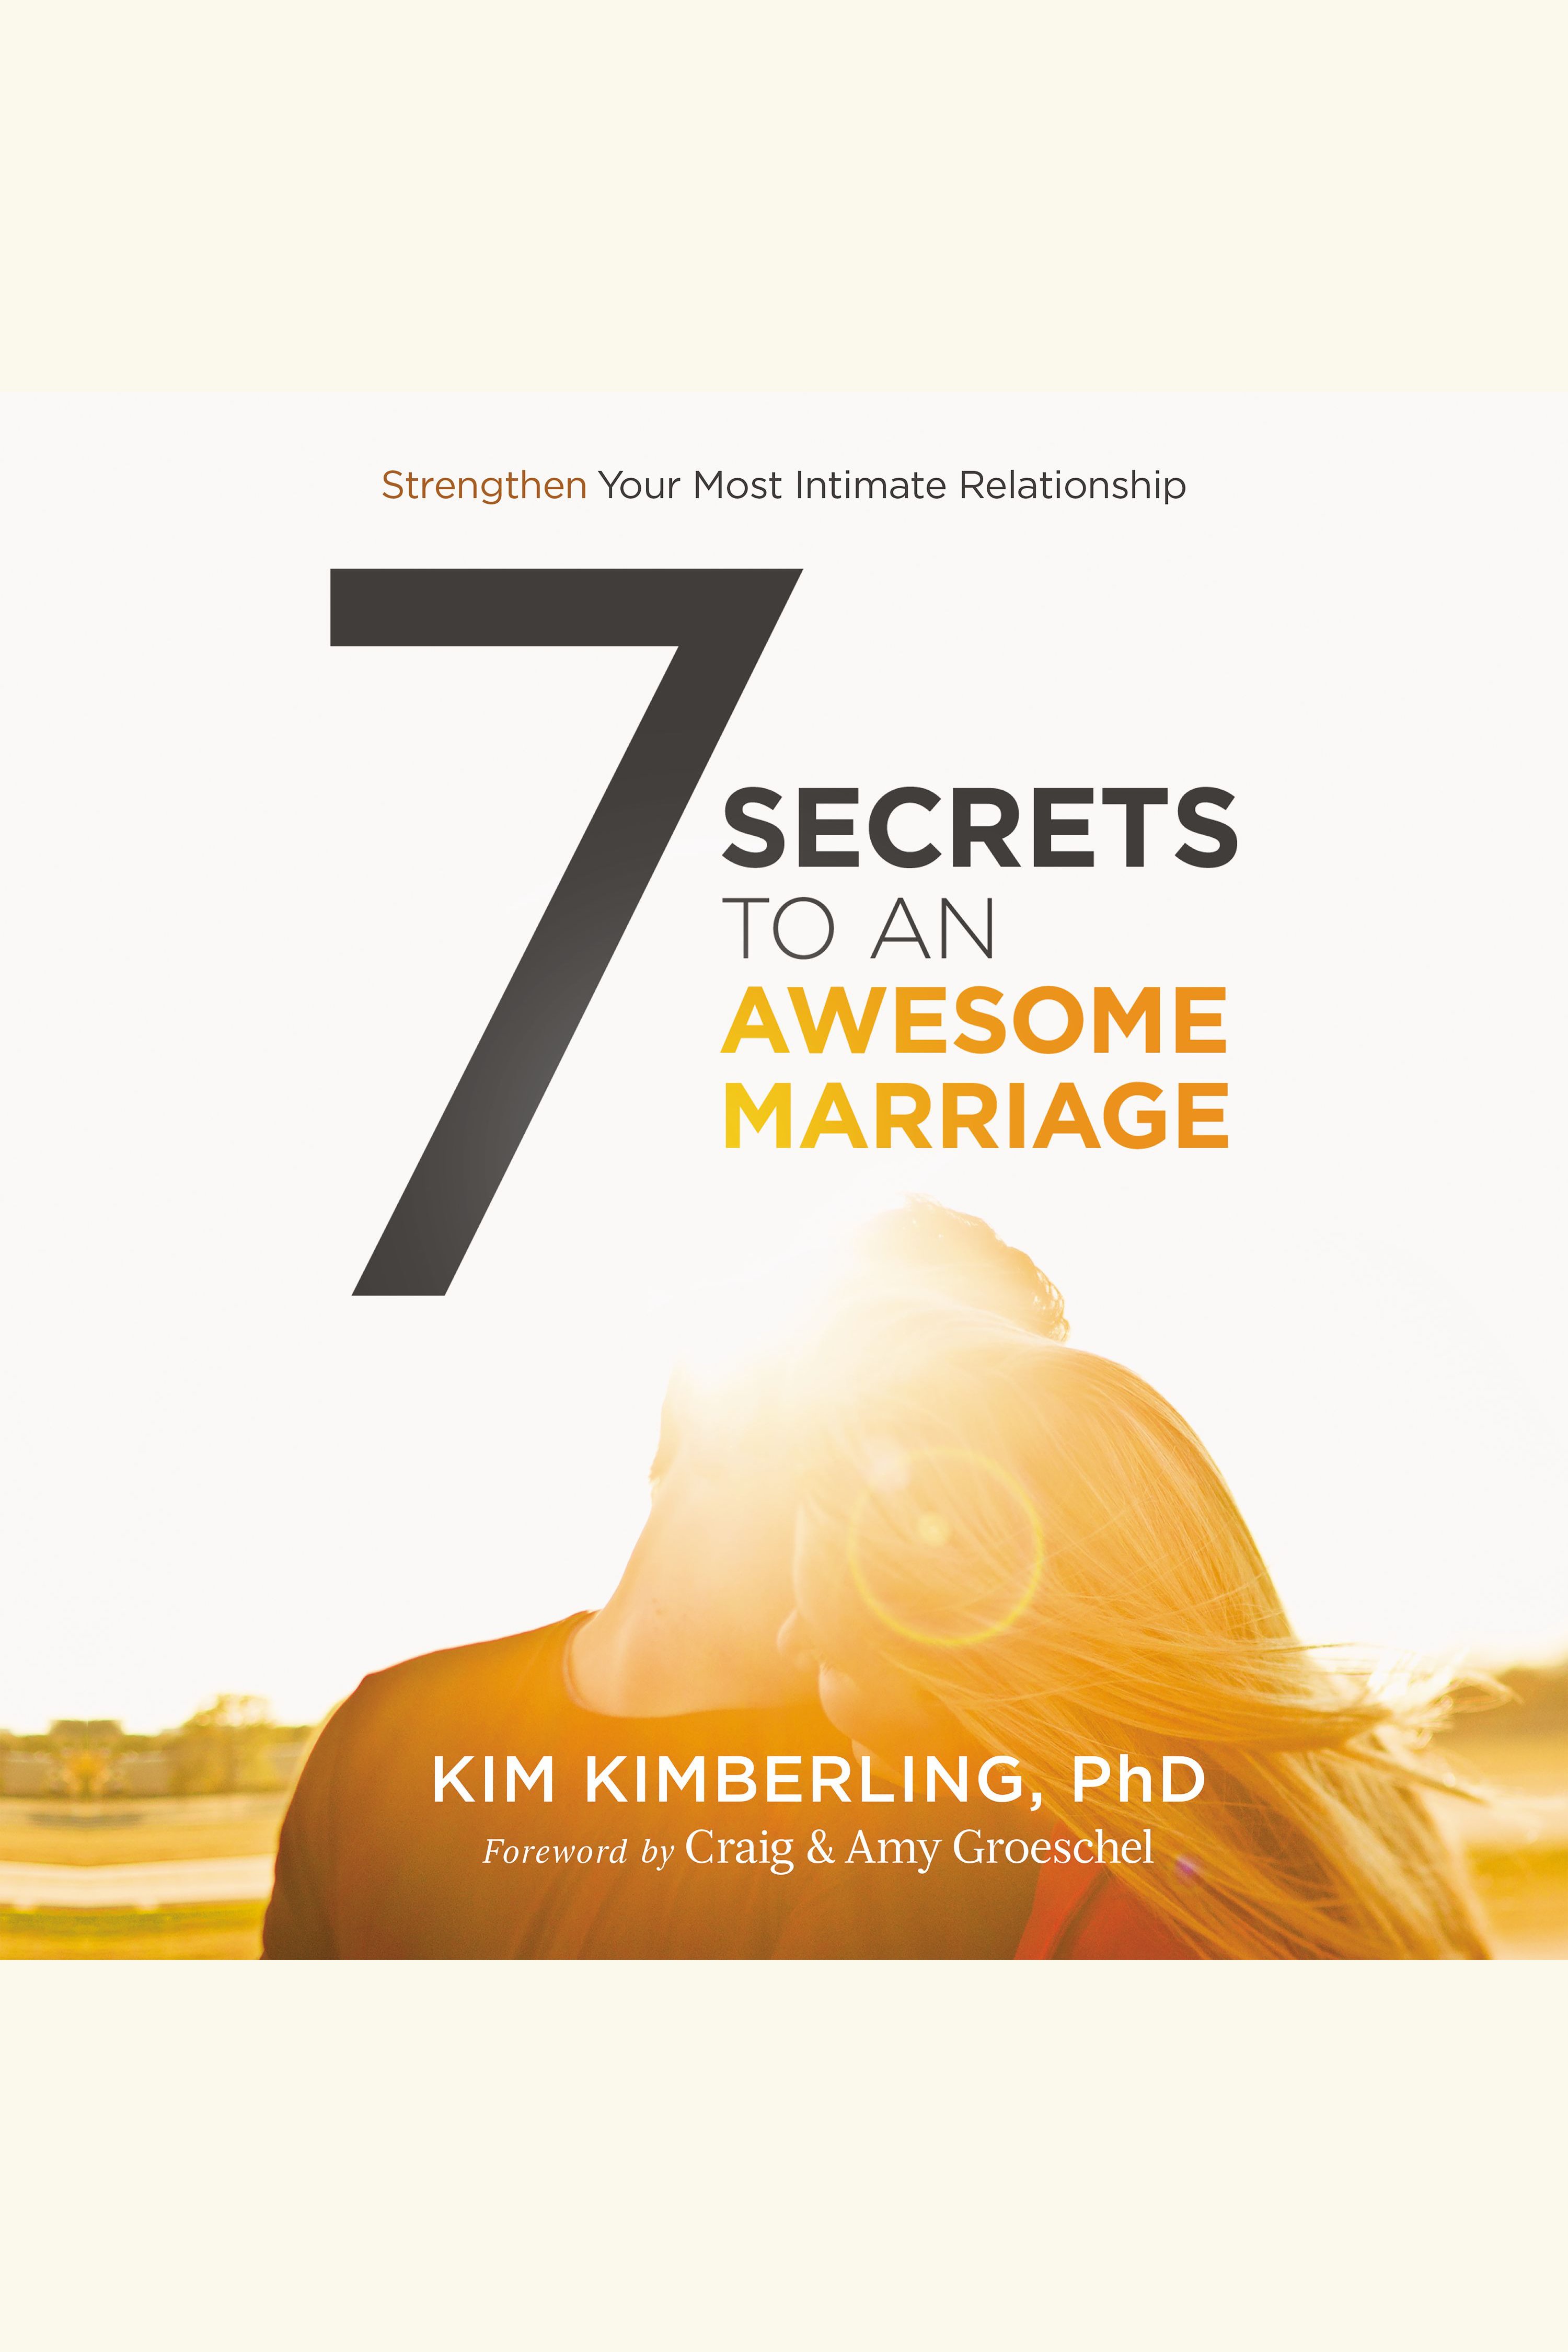 7 Secrets to an Awesome Marriage Strengthen Your Most Intimate Relationship cover image